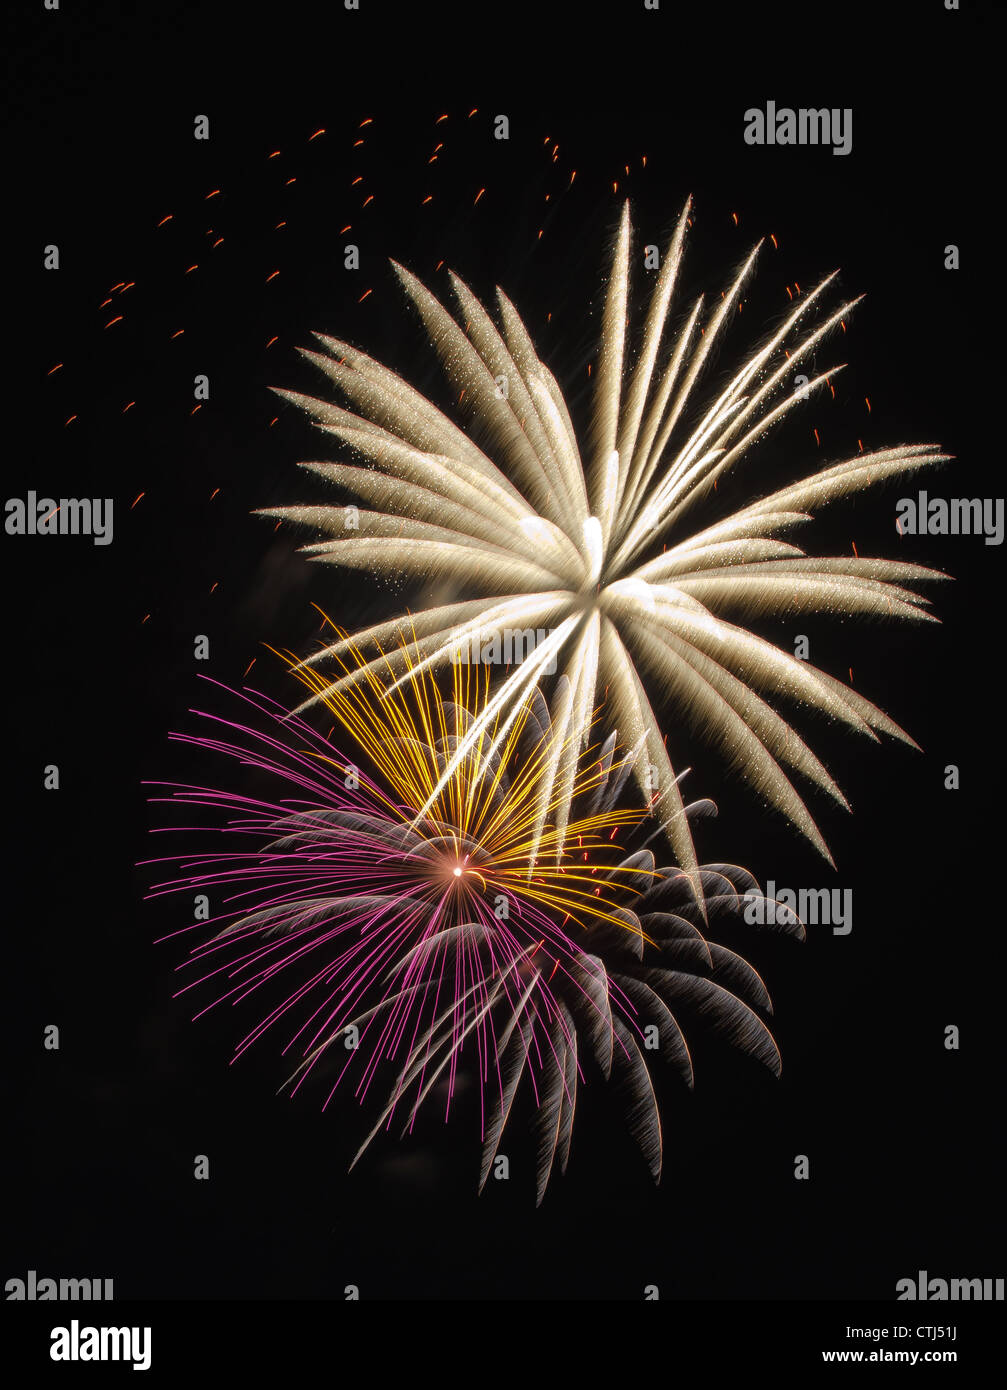 Colorful New Year's fireworks display Stock Photo